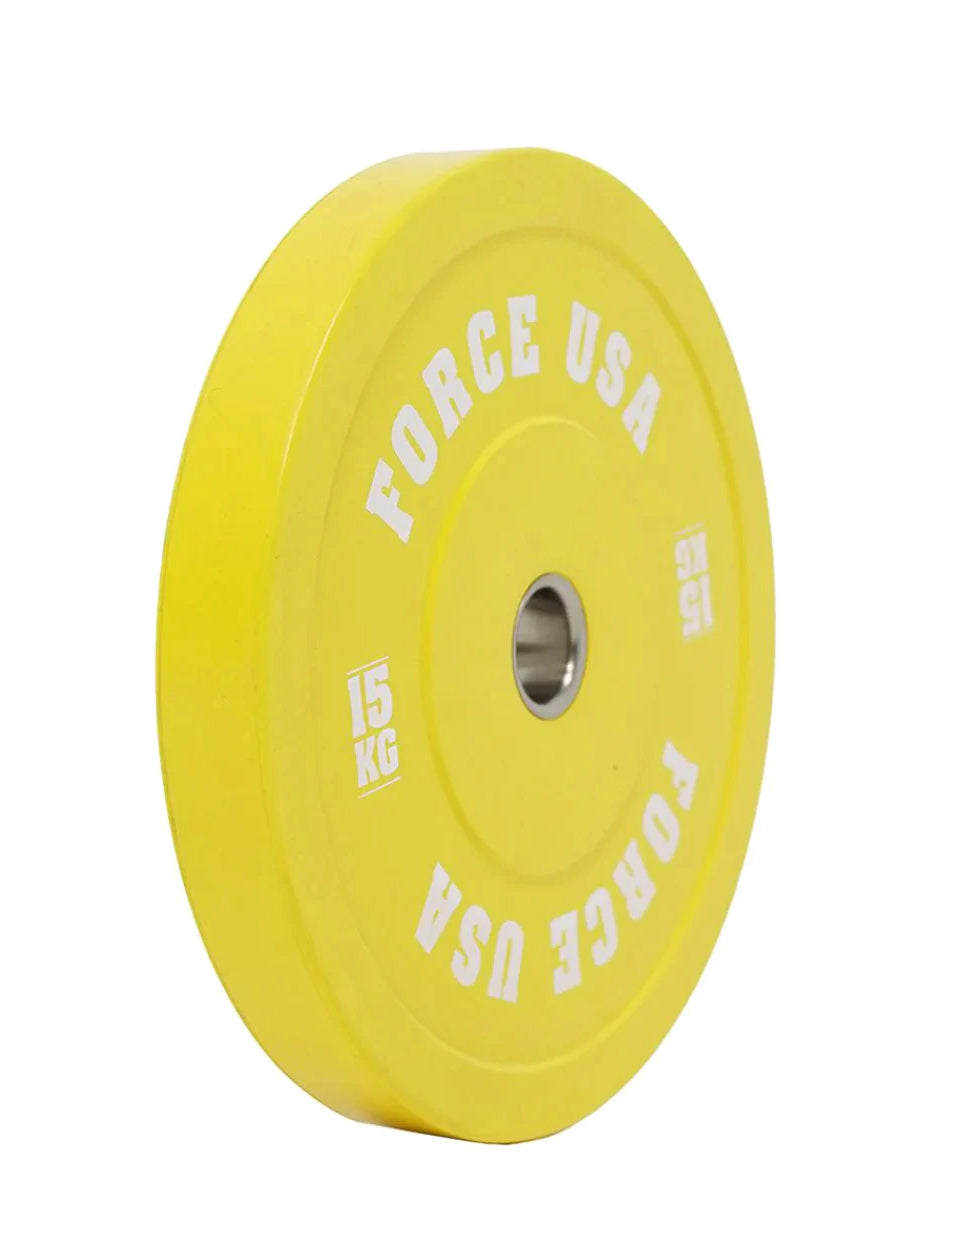 FORCE USA Pro Grade Coloured Bumper Plates 5 to 25 kg